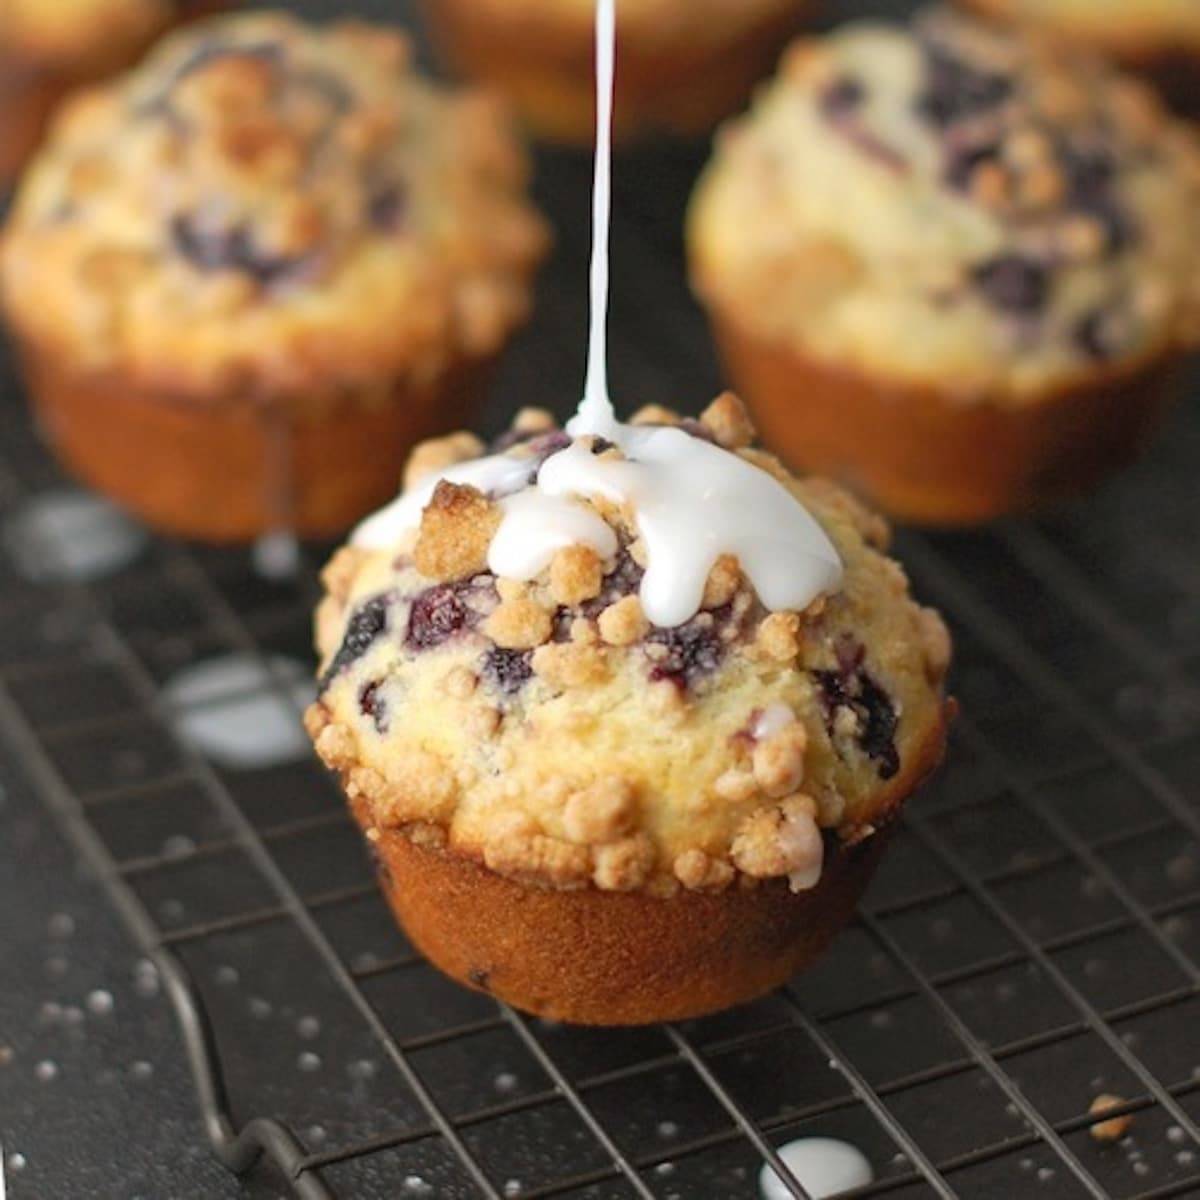 Cornmeal blueberry muffins topped with streusel and glaze.